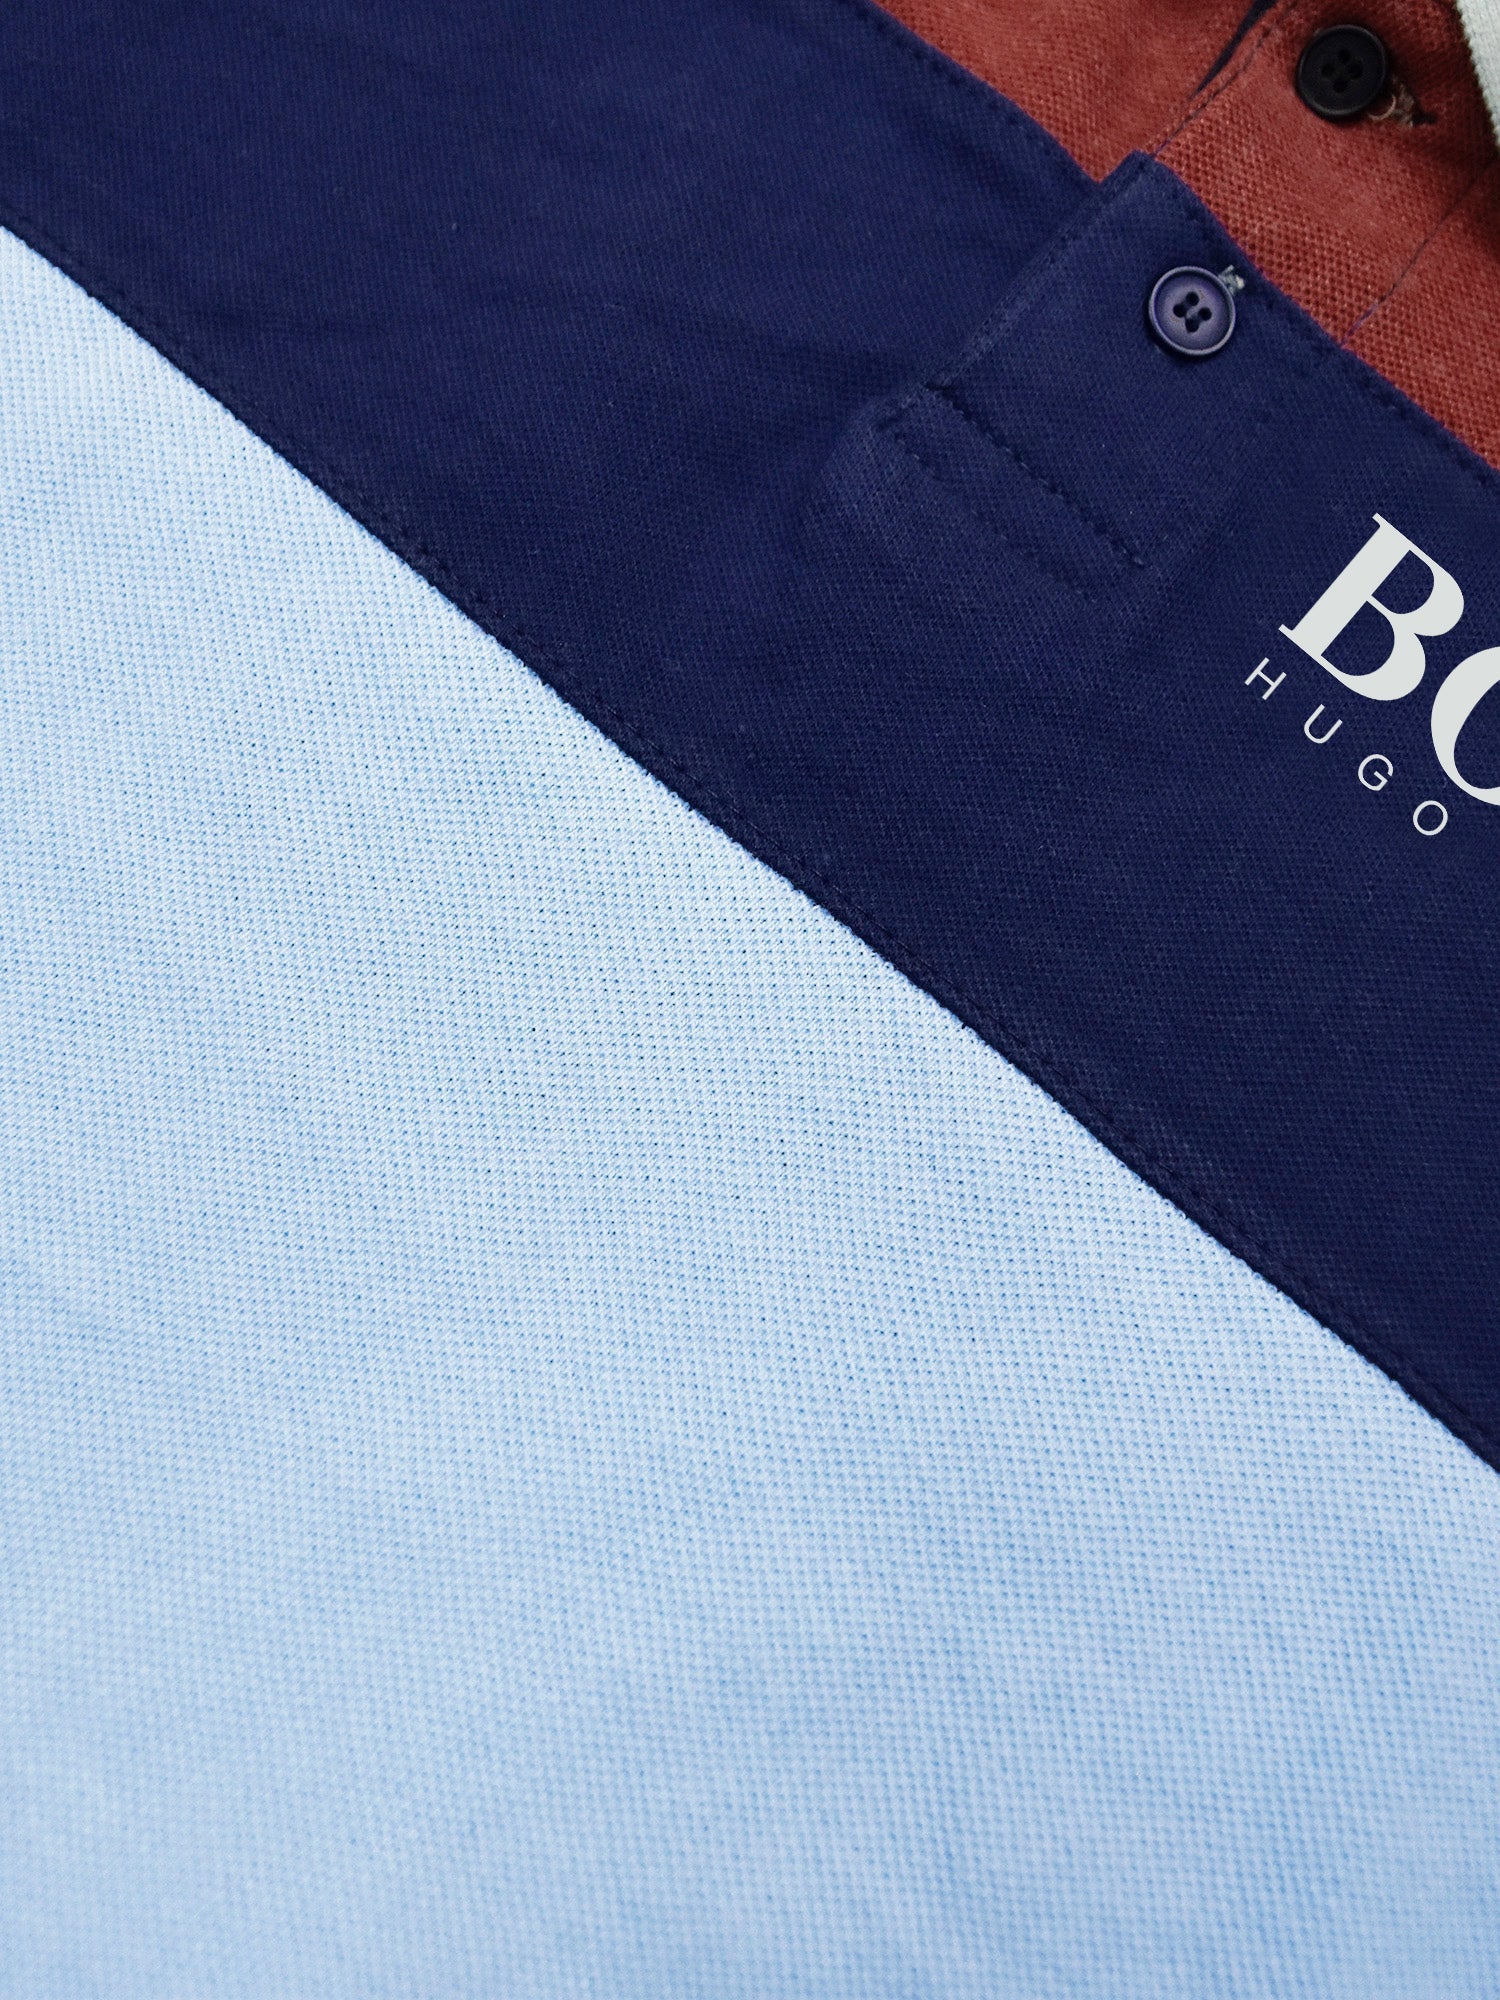 HB Summer P.Q Polo Shirt For Kids-Sky with Navy & Brown-RT284